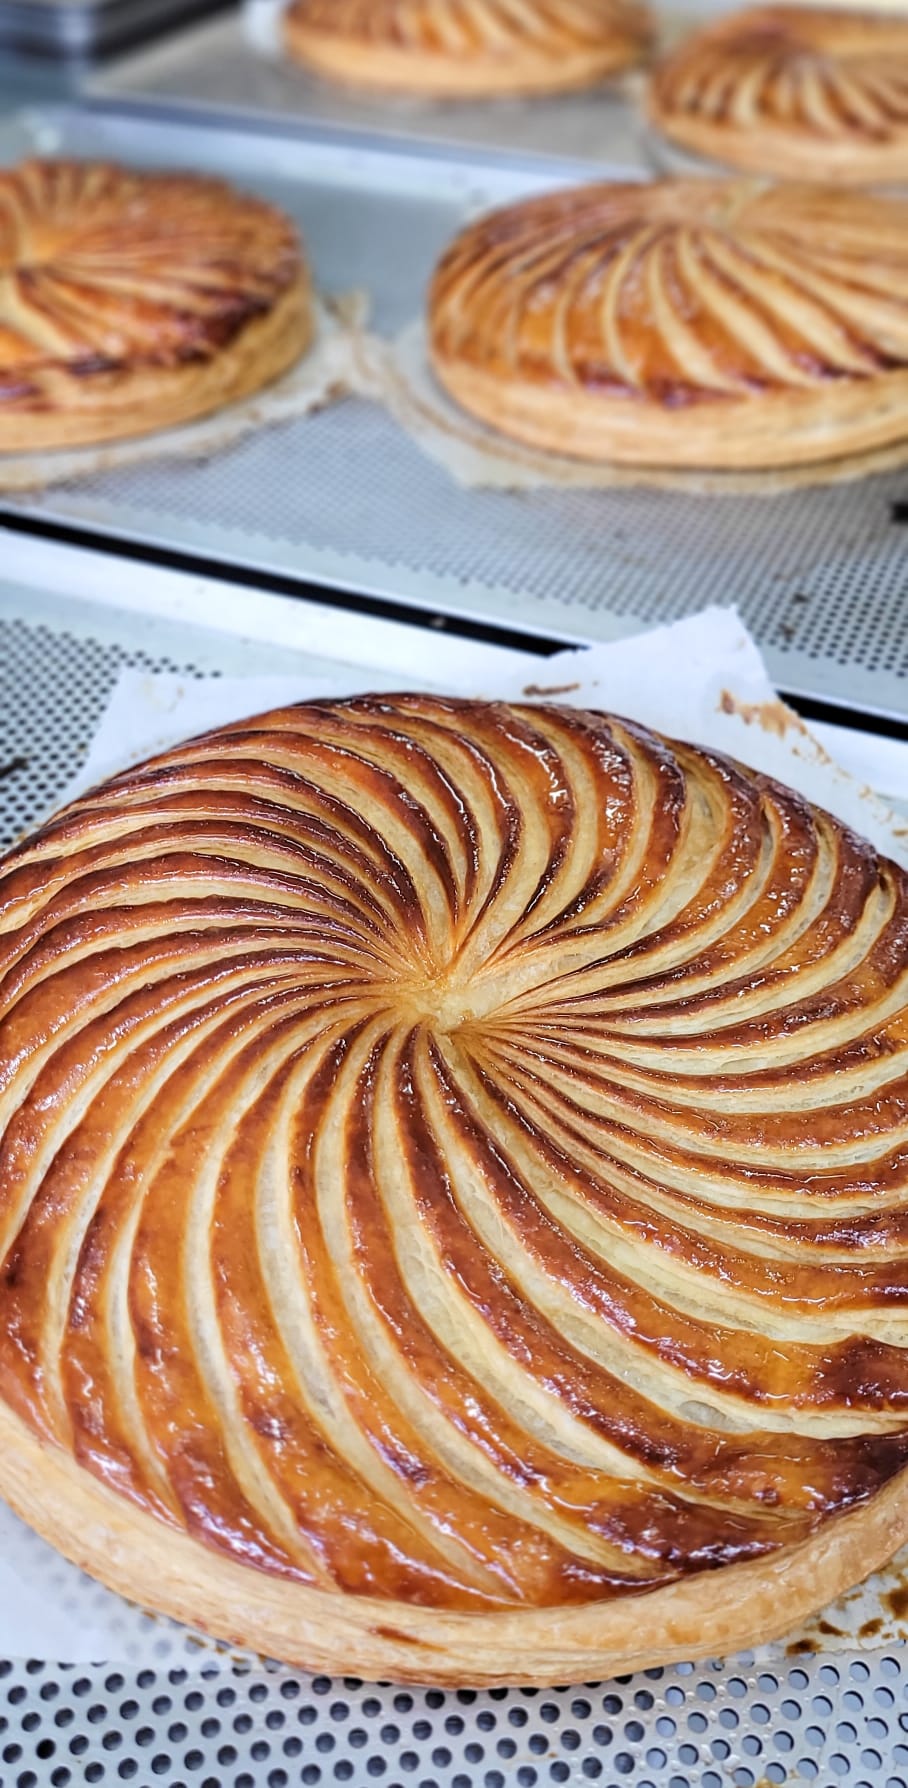 Kings' Cake (Galette des Rois) – Frenchie Toquee